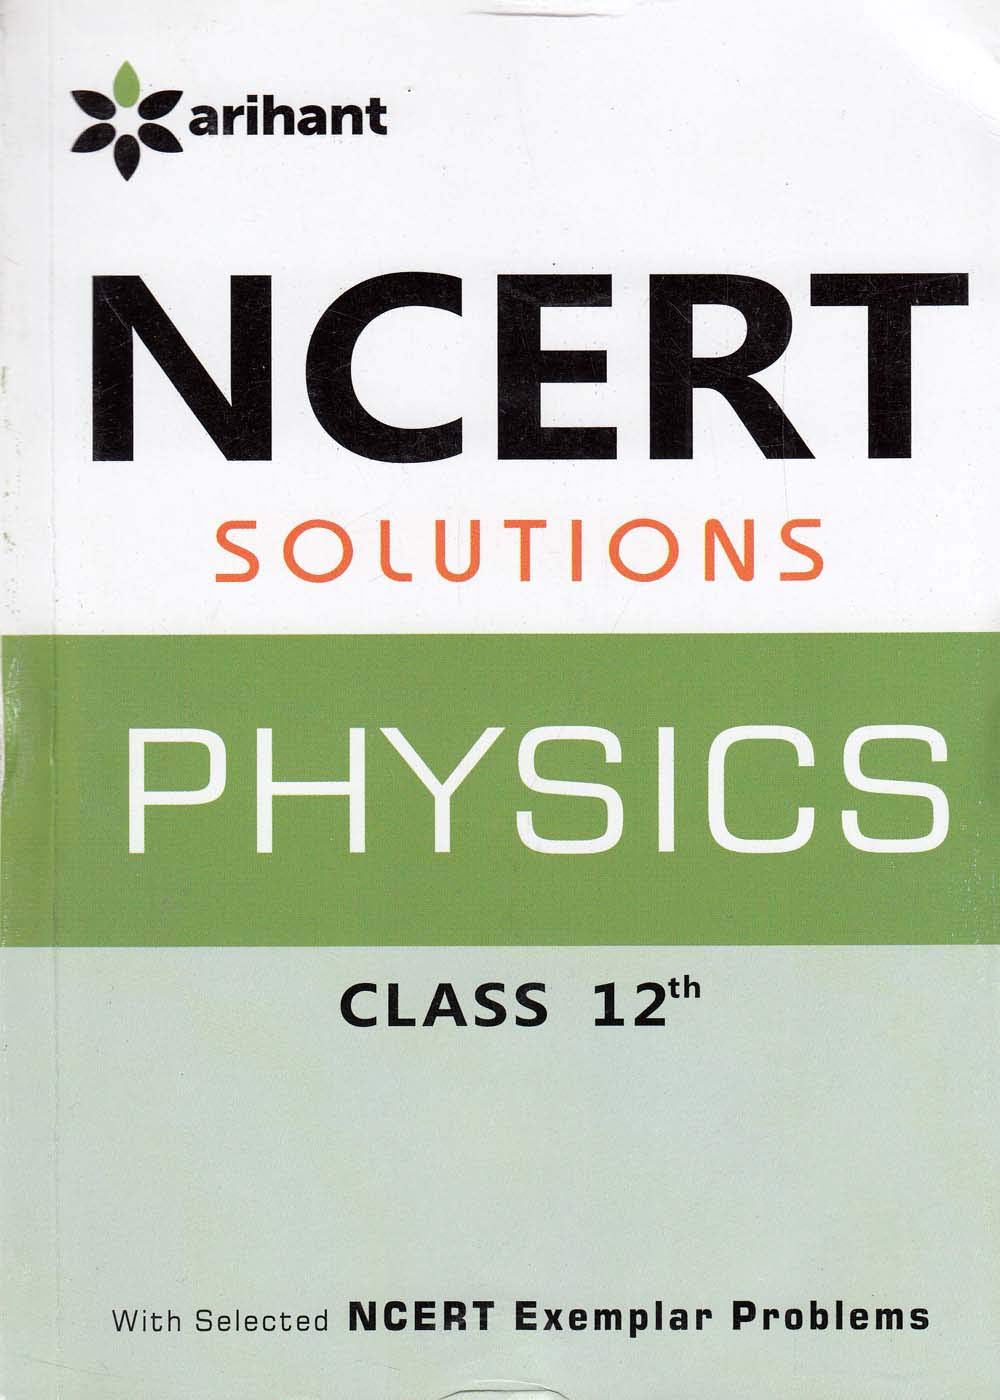 NCERT Solutions Physics  12th